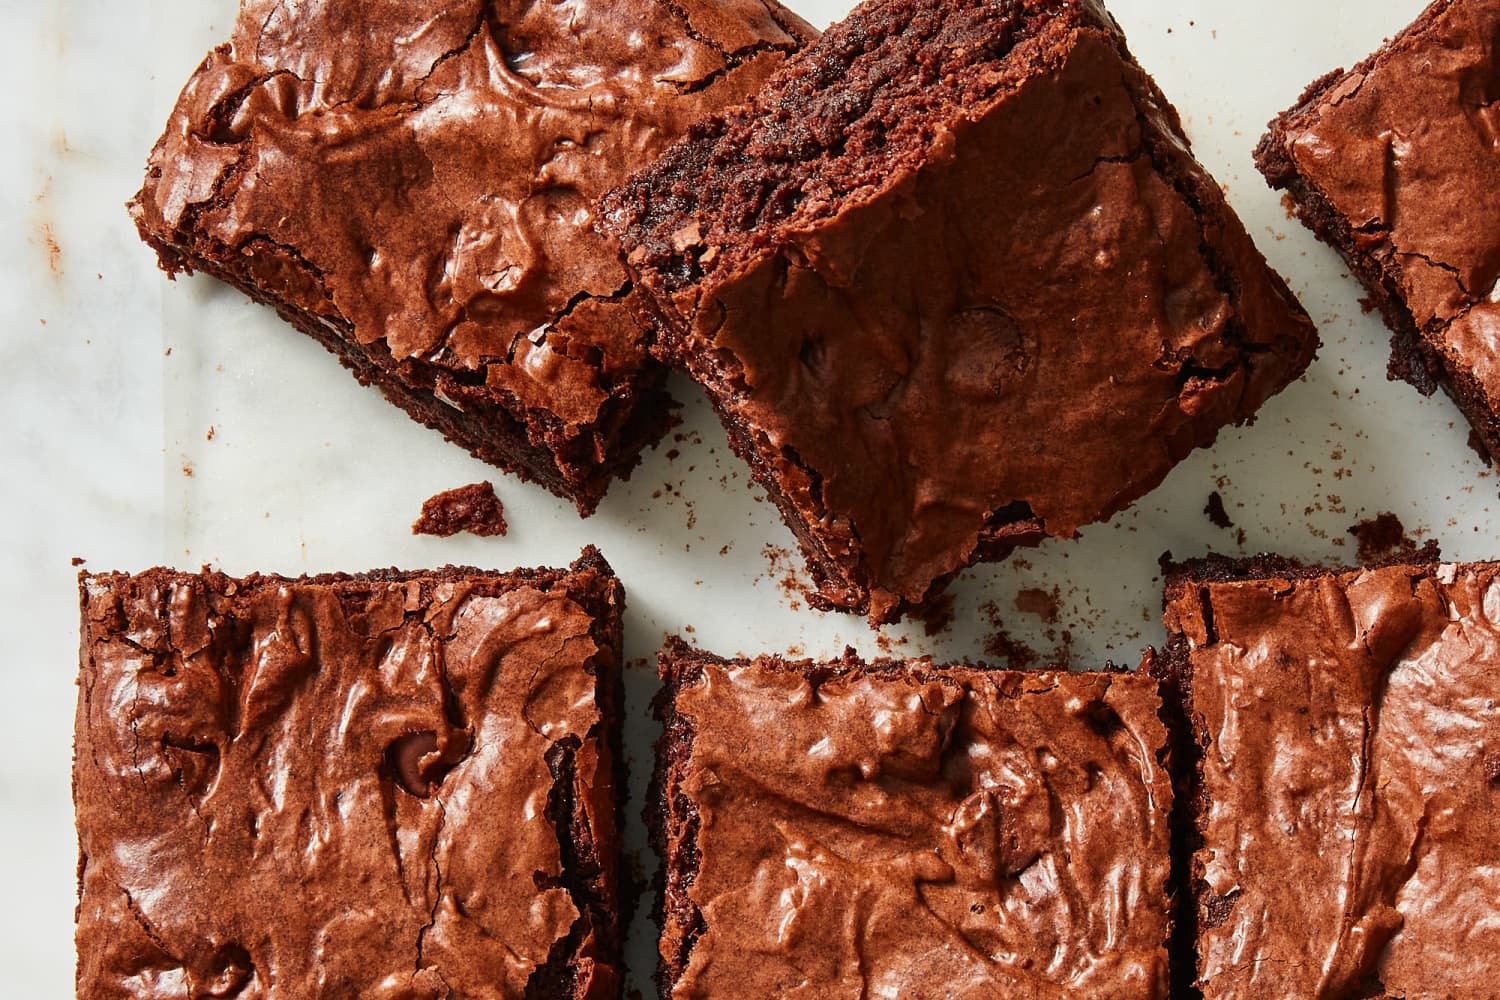 Best Ever Chewy Brownies Recipe - Handle the Heat